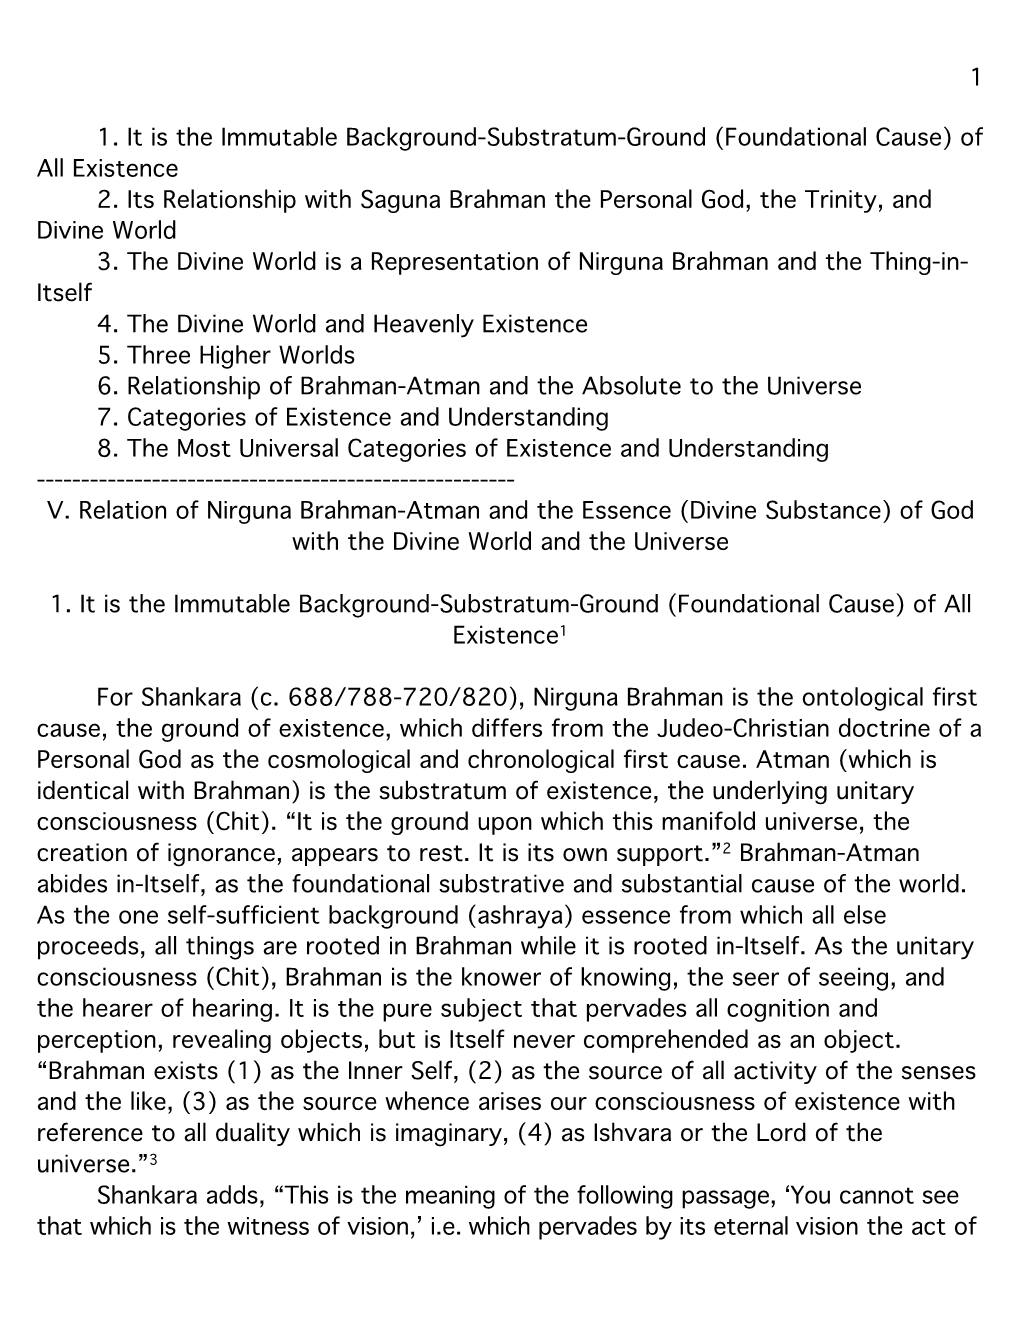 Relation of Nirguna Brahman-Atman and the Essence (Divine Substance) of God with the Divine World and the Universe